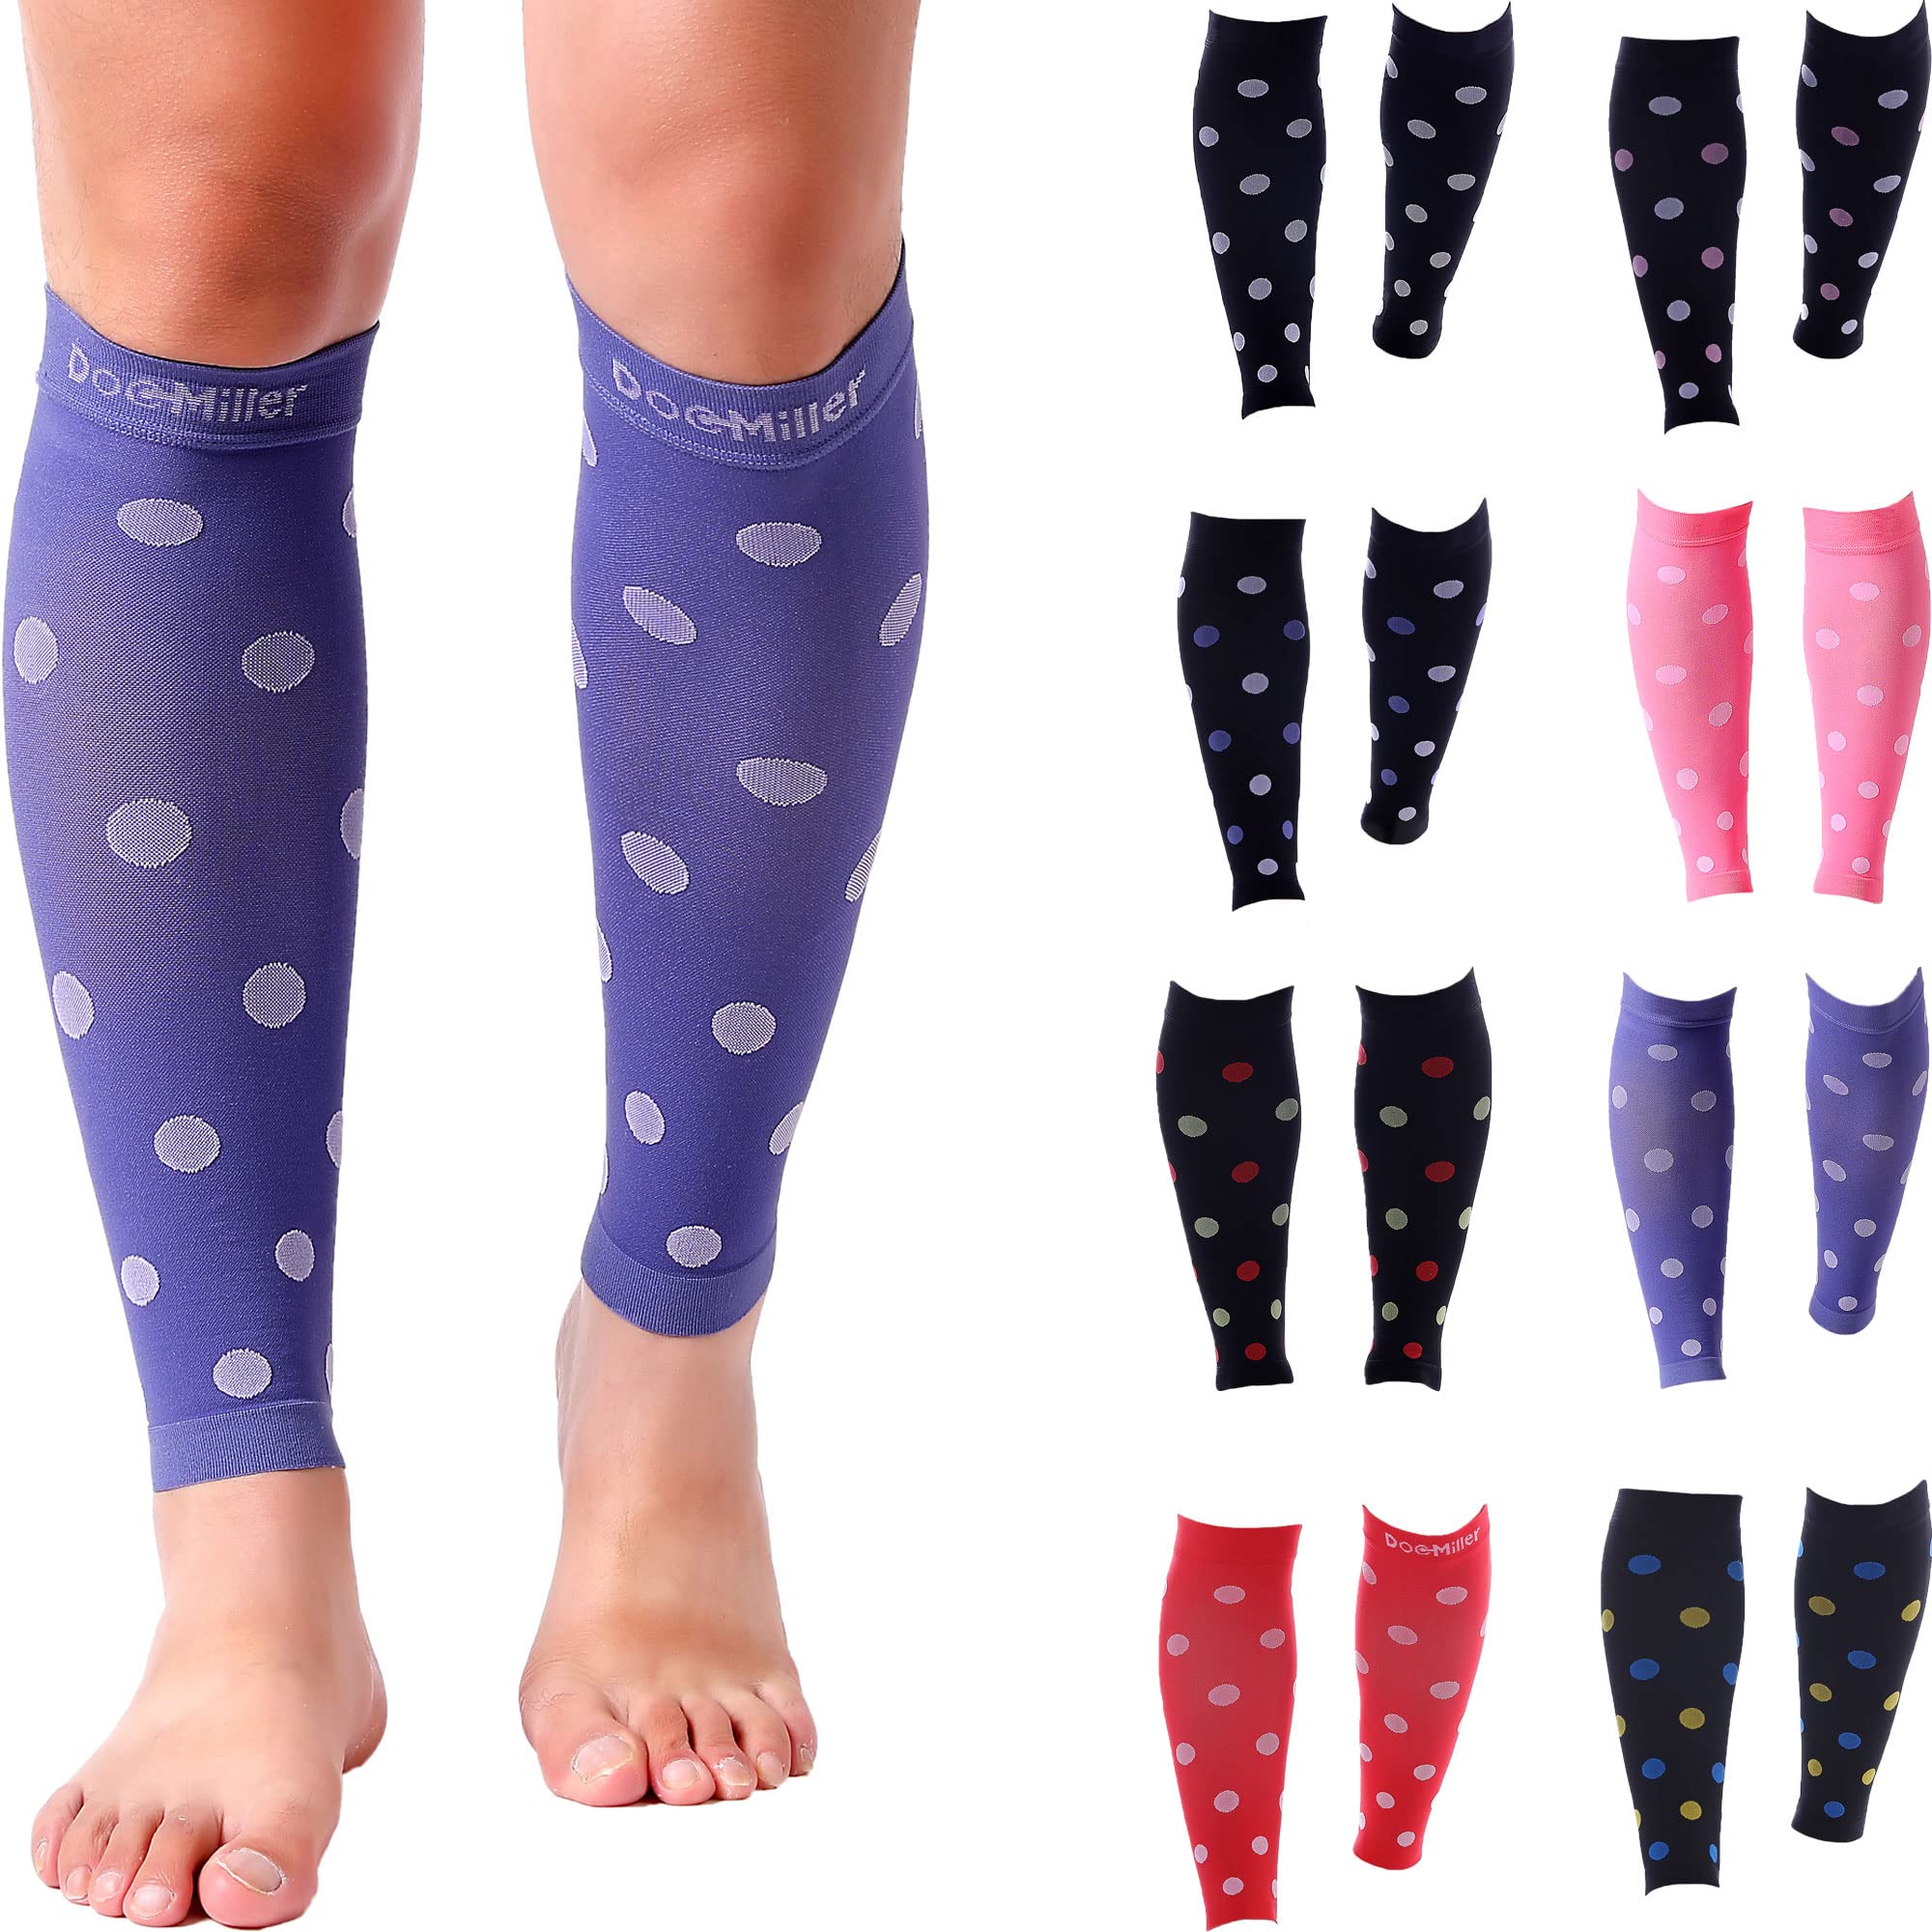 1 Pair Calf Compression Sleeves for Women Men Compression Socks